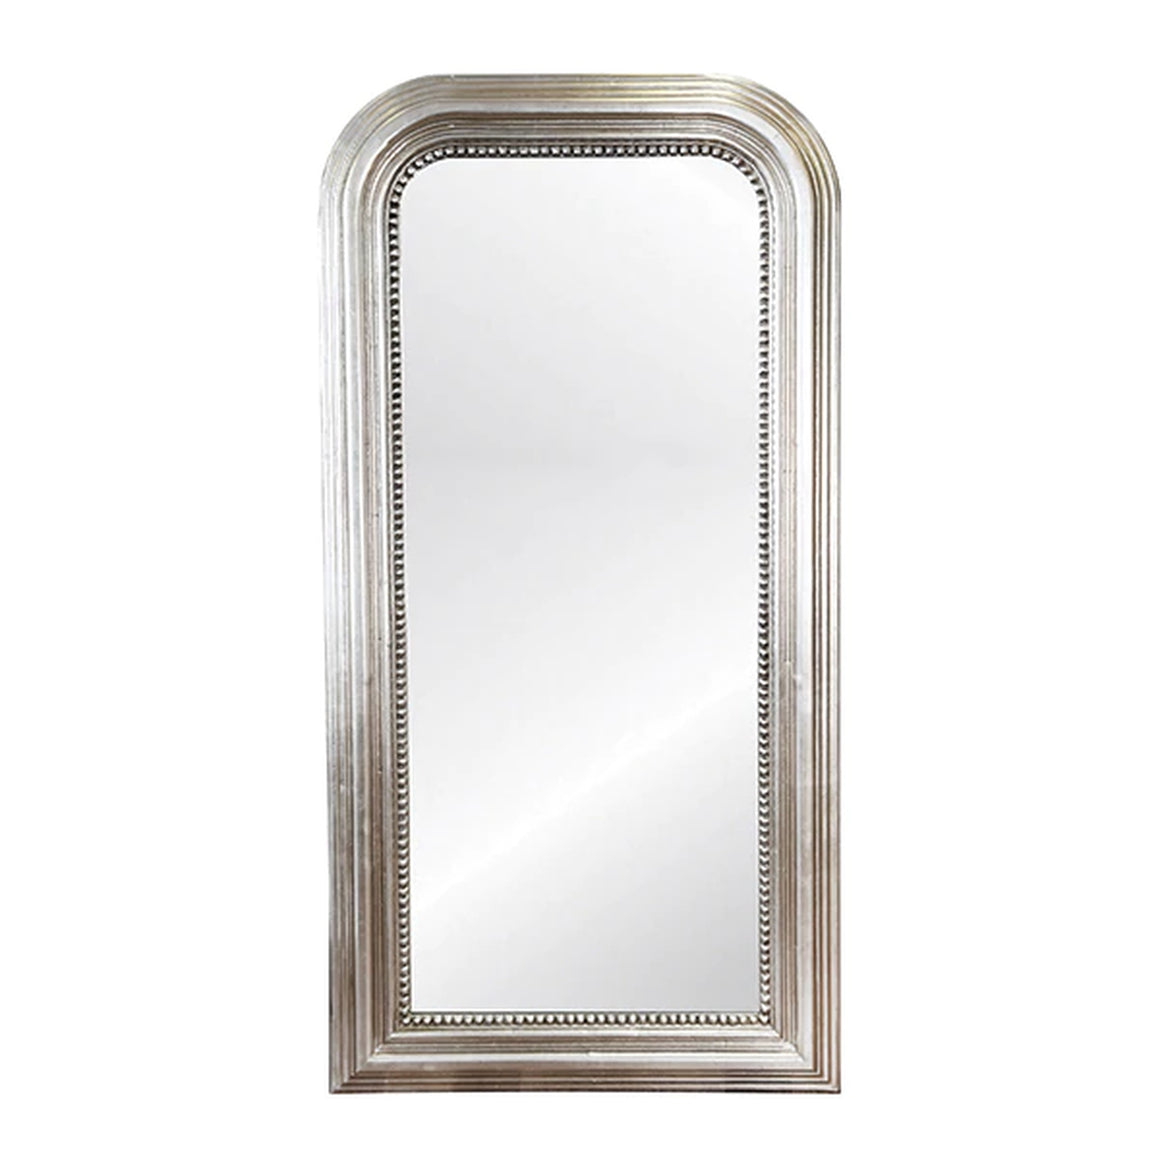 Worlds Away Waverly Tall Curved Edge Mirror - Silver Leaf